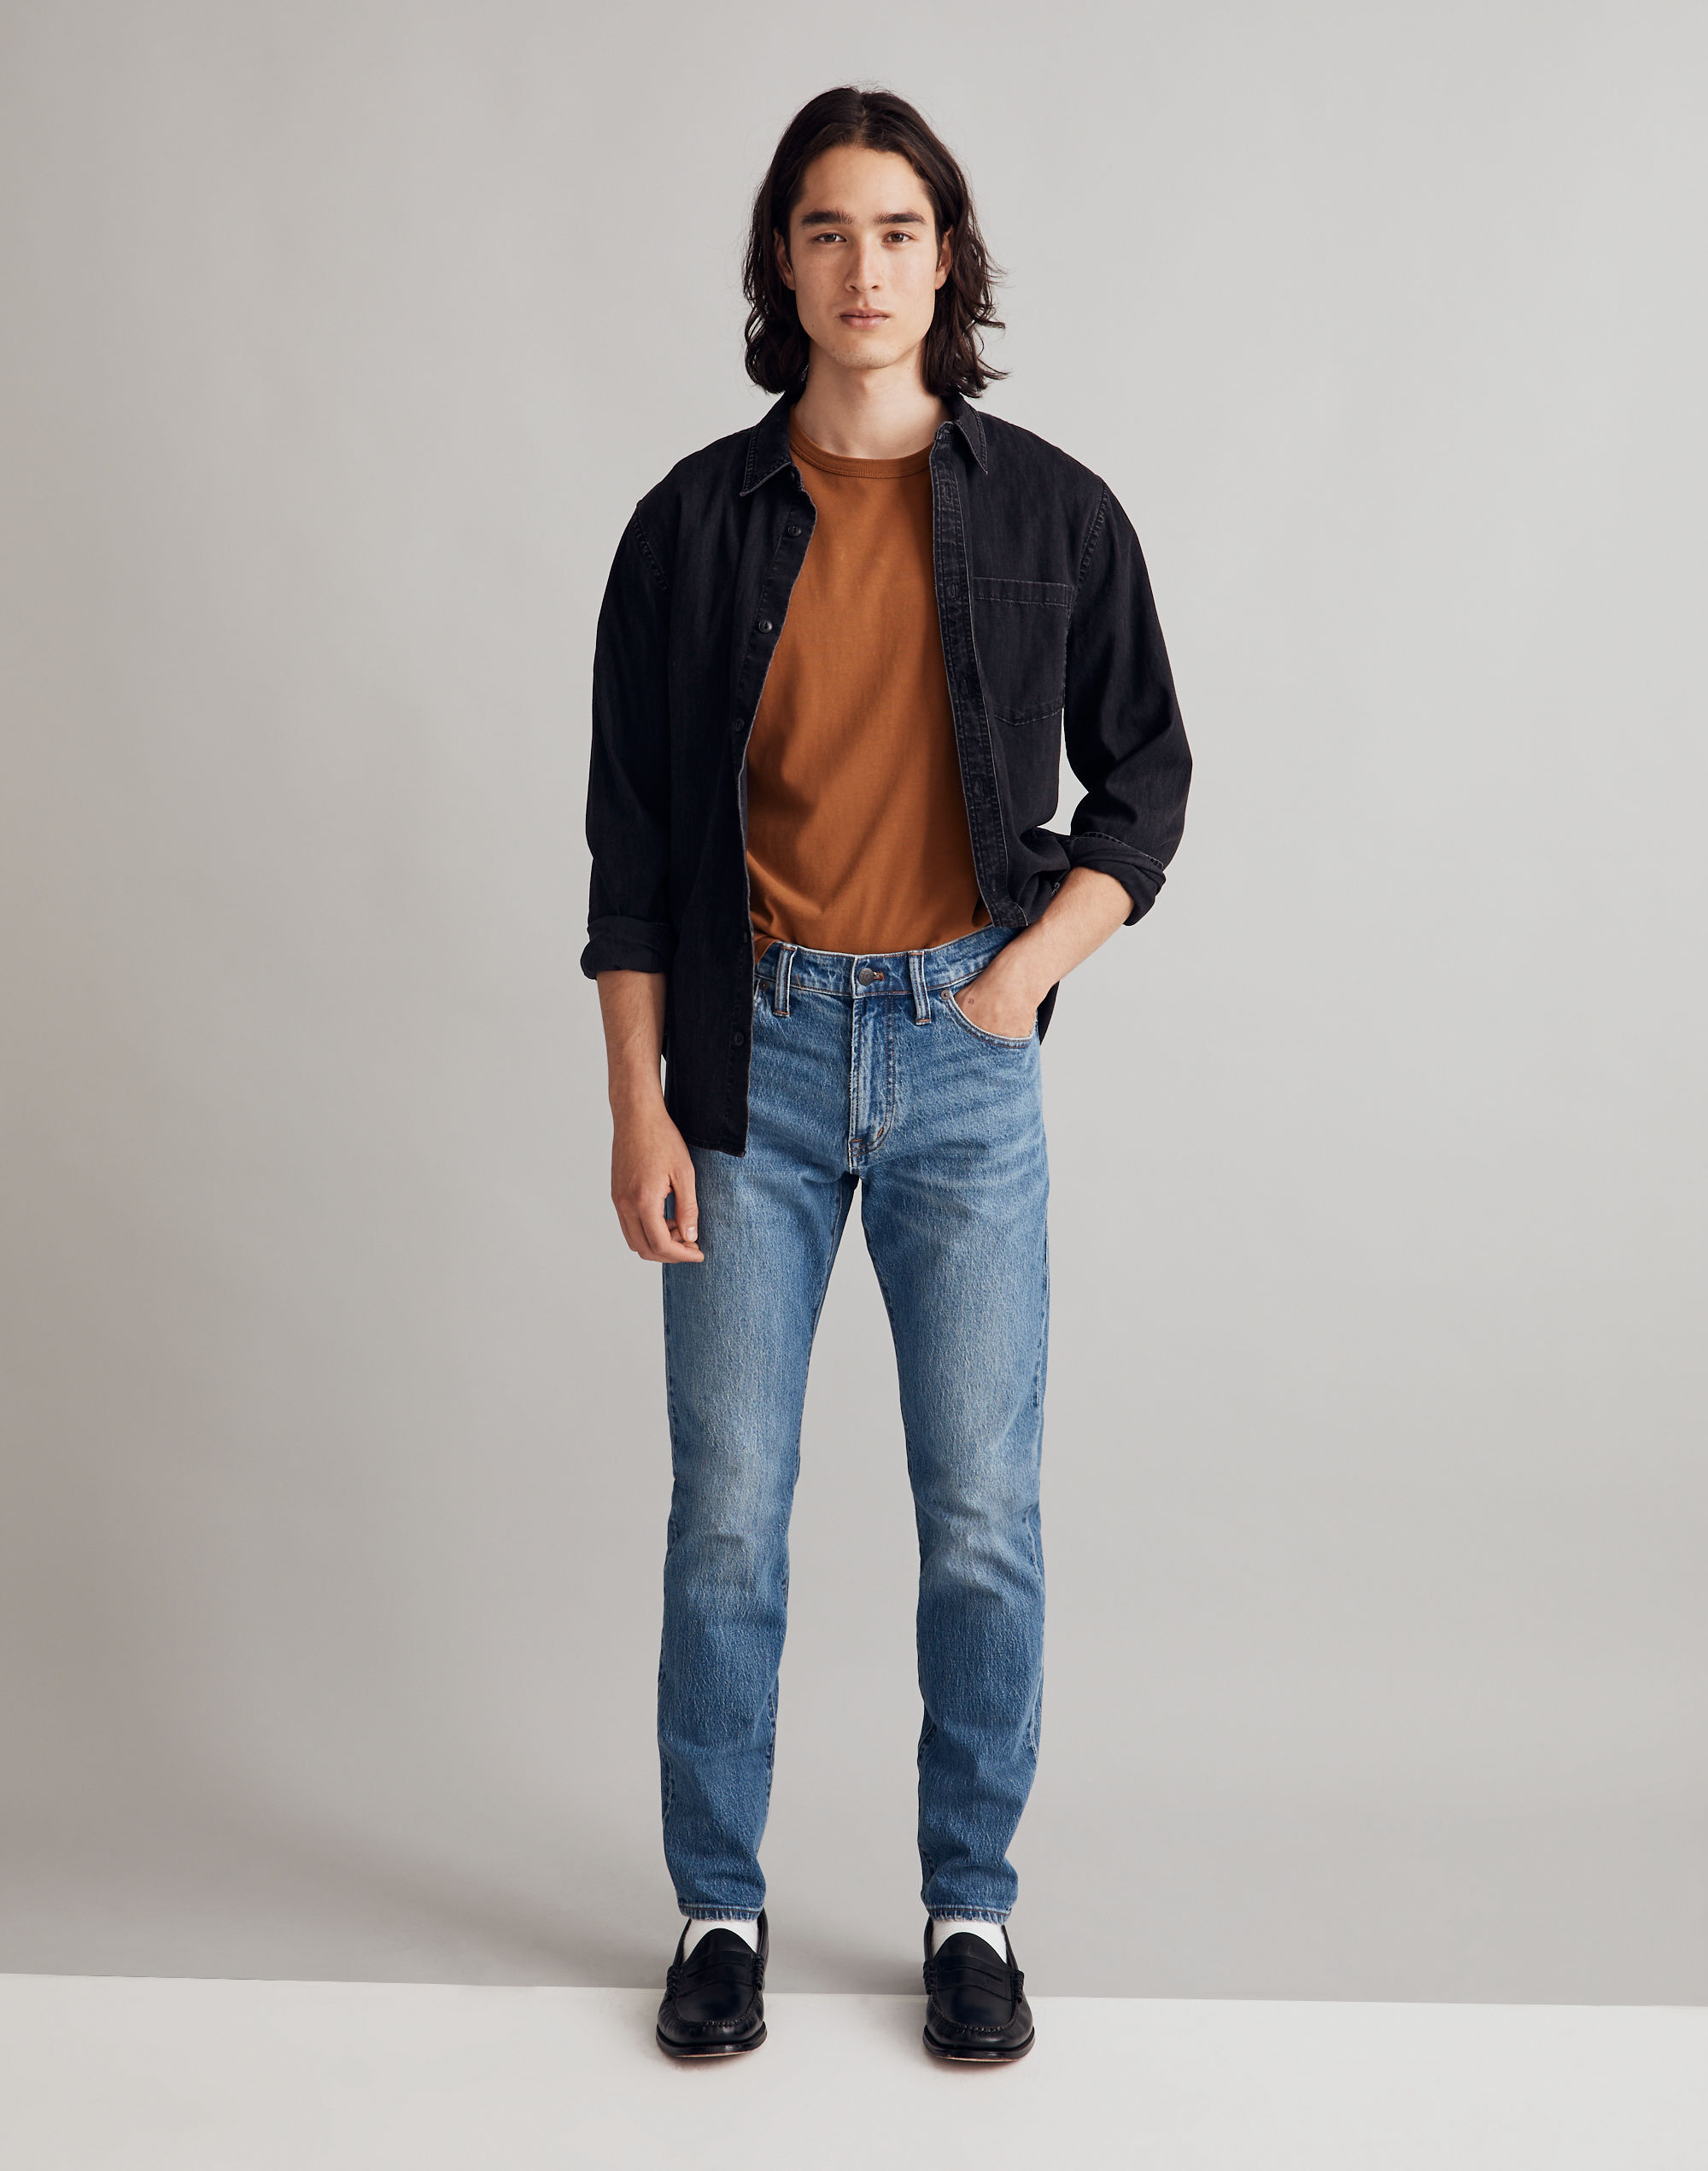 Slim Jeans in Marcey Wash Product Image